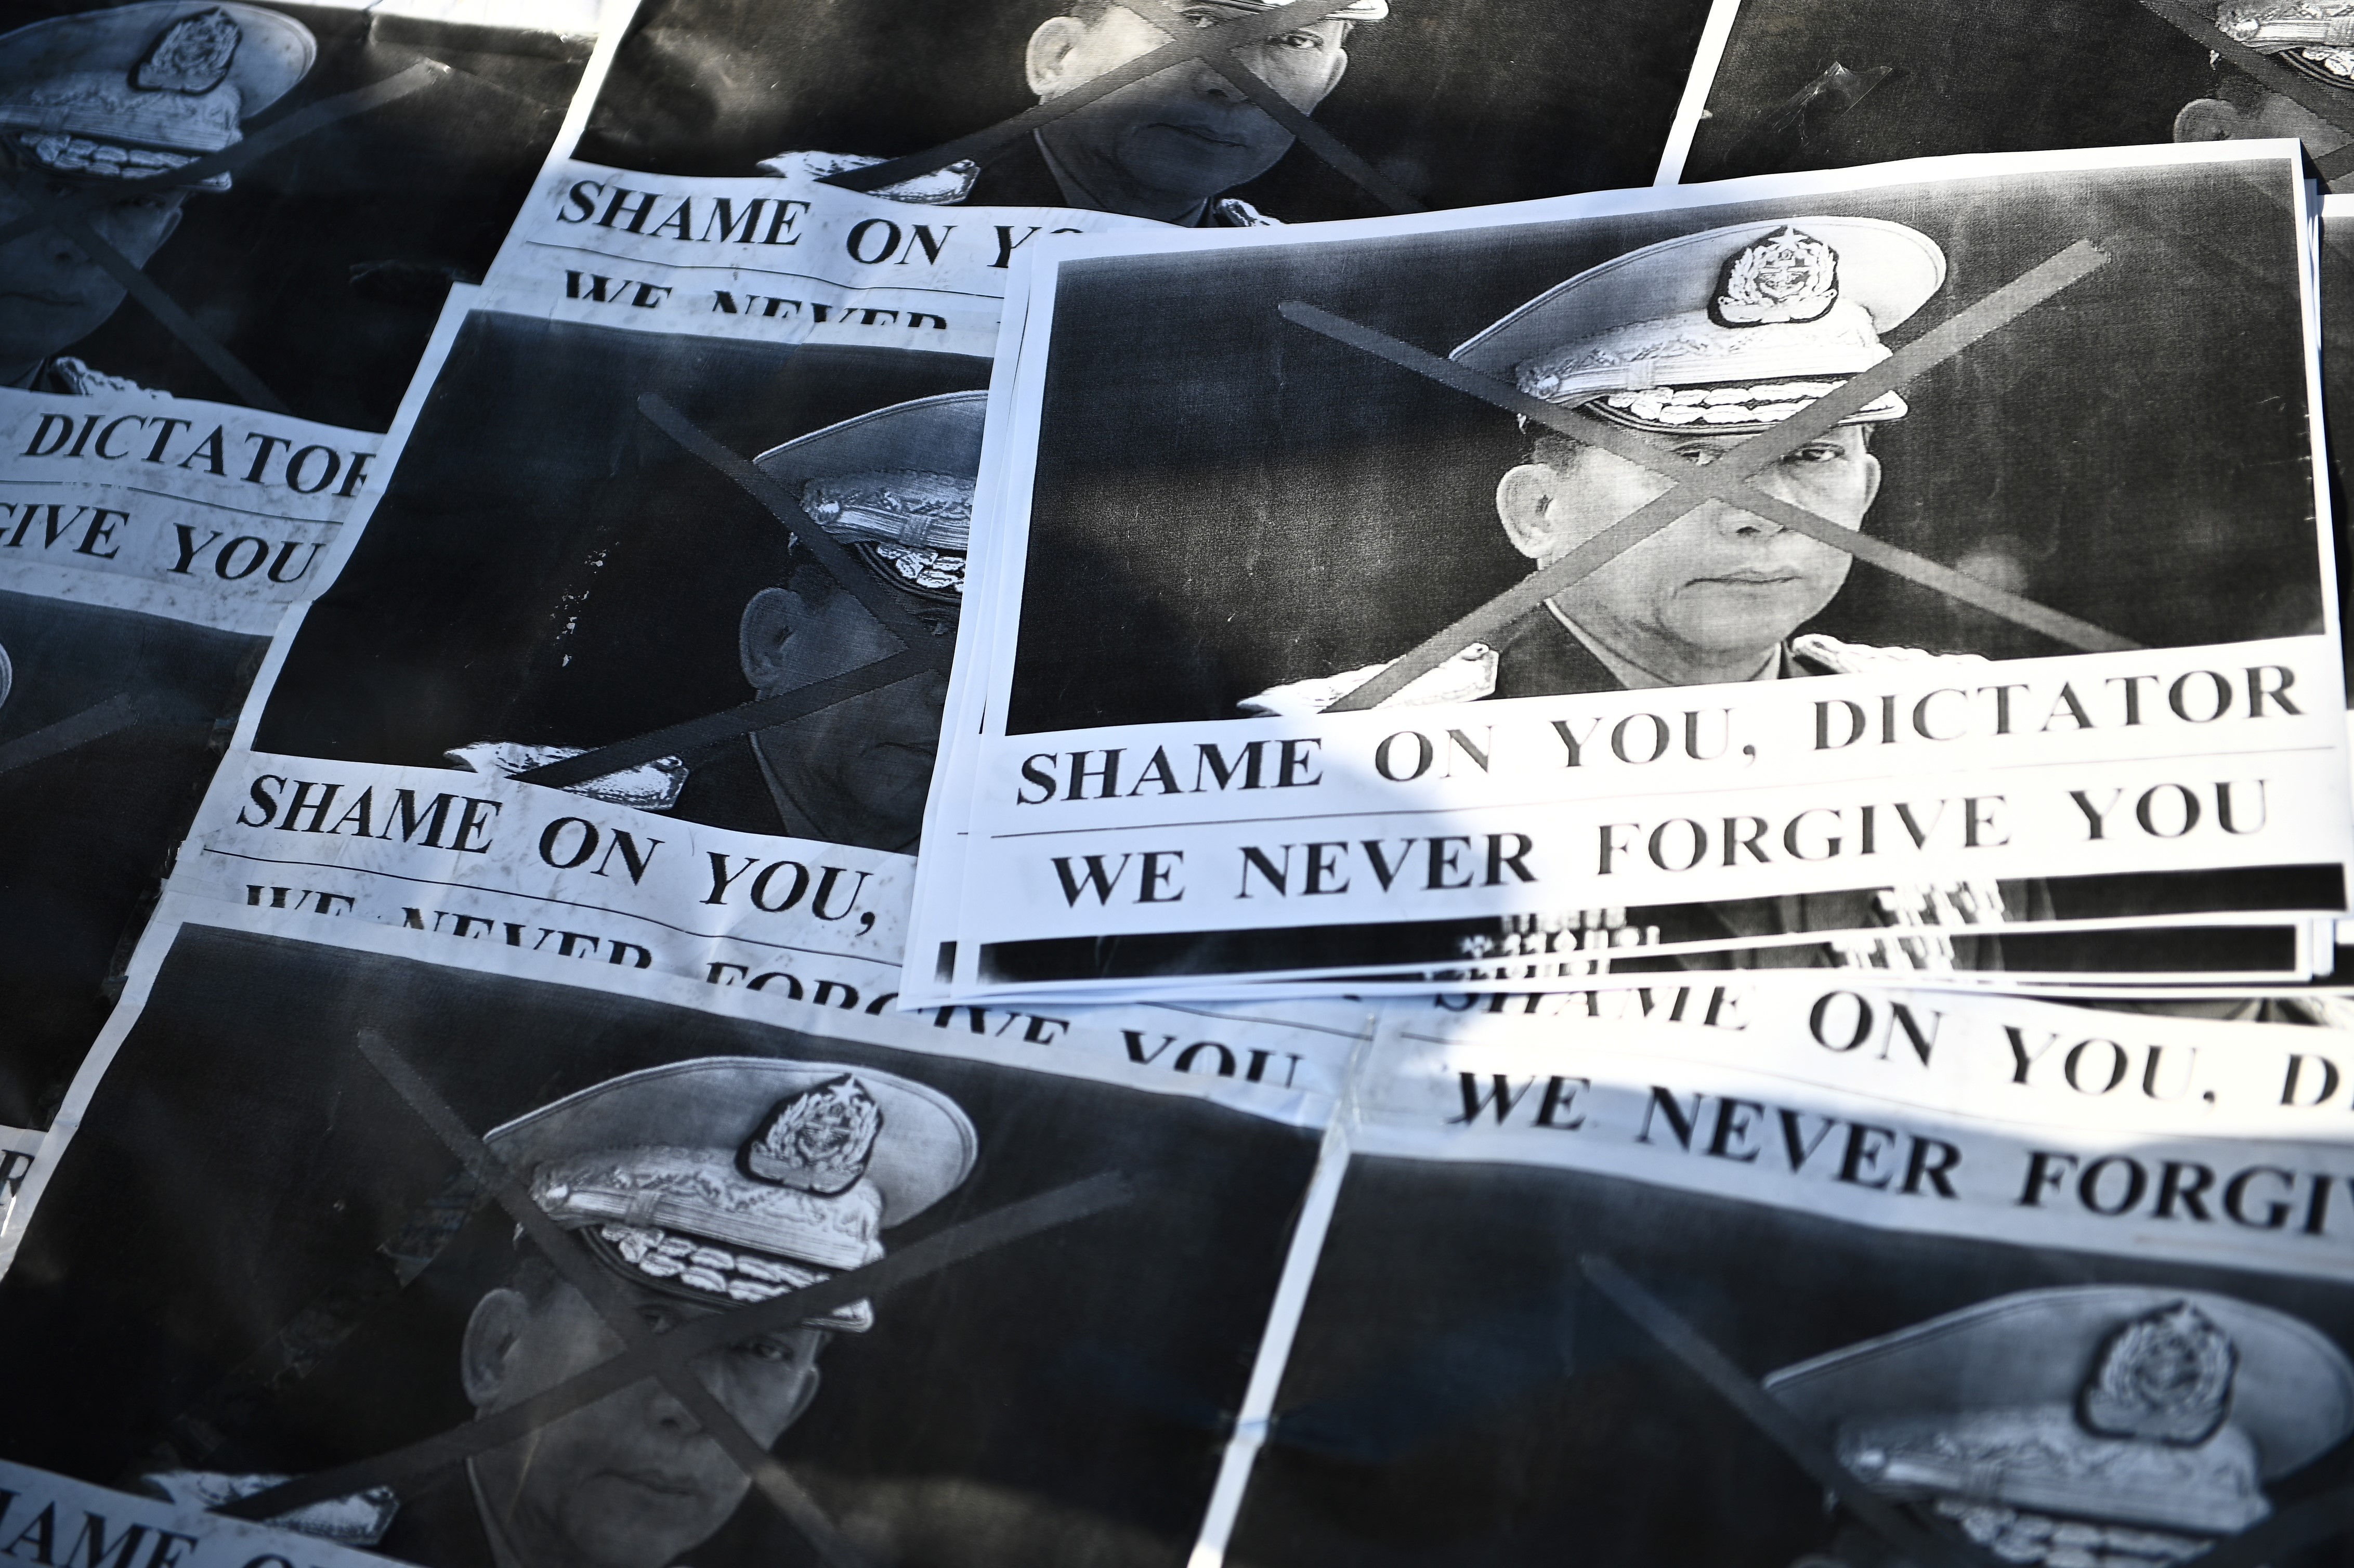 Images of Myanmar's military chief General Min Aung Hlaing are pictured as a group of Myanmar activists protest outside United Nations University building in Tokyo on Feb. 1, 2021, following a military coup in the country after arresting civilian leader Aung San Suu Kyi and other senior officials. Philip FONG / AFP